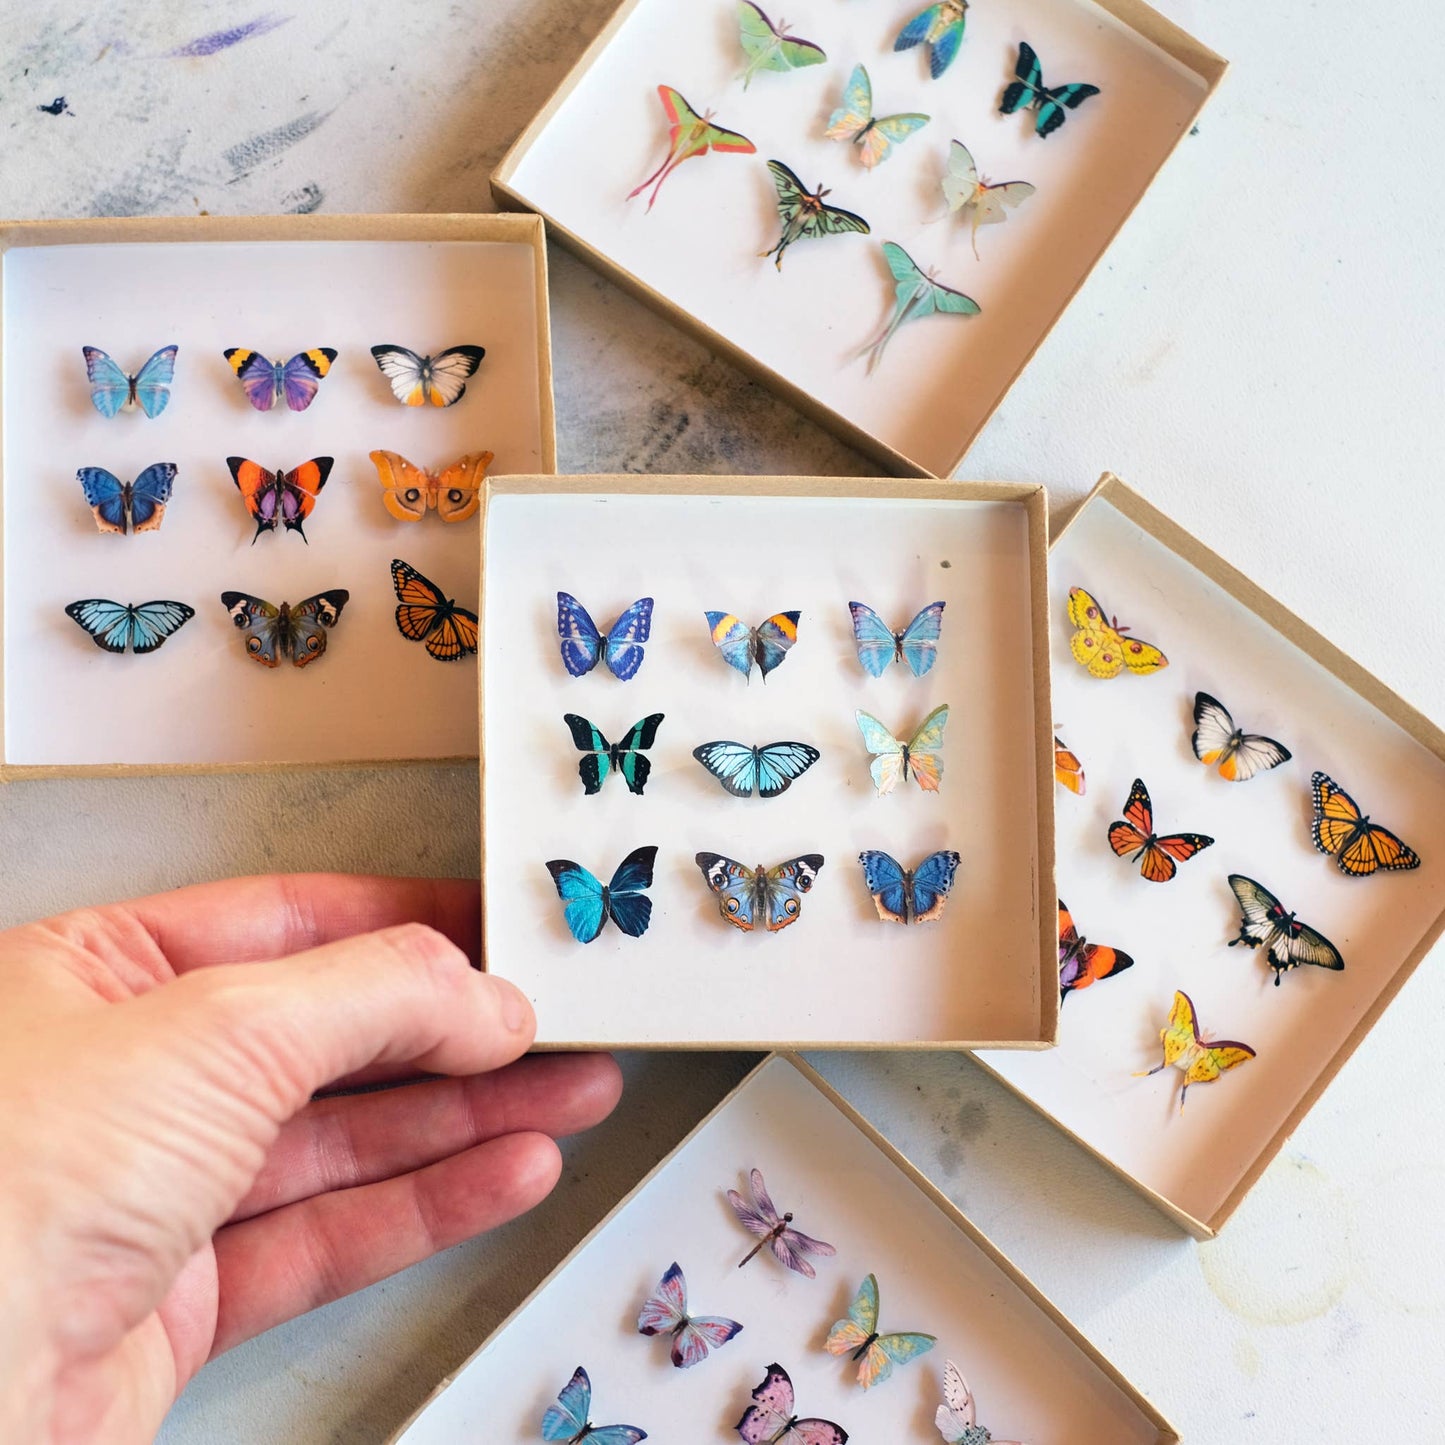 Tiny and lifelike paper butterflies to craft with or to decorate a space or gift!